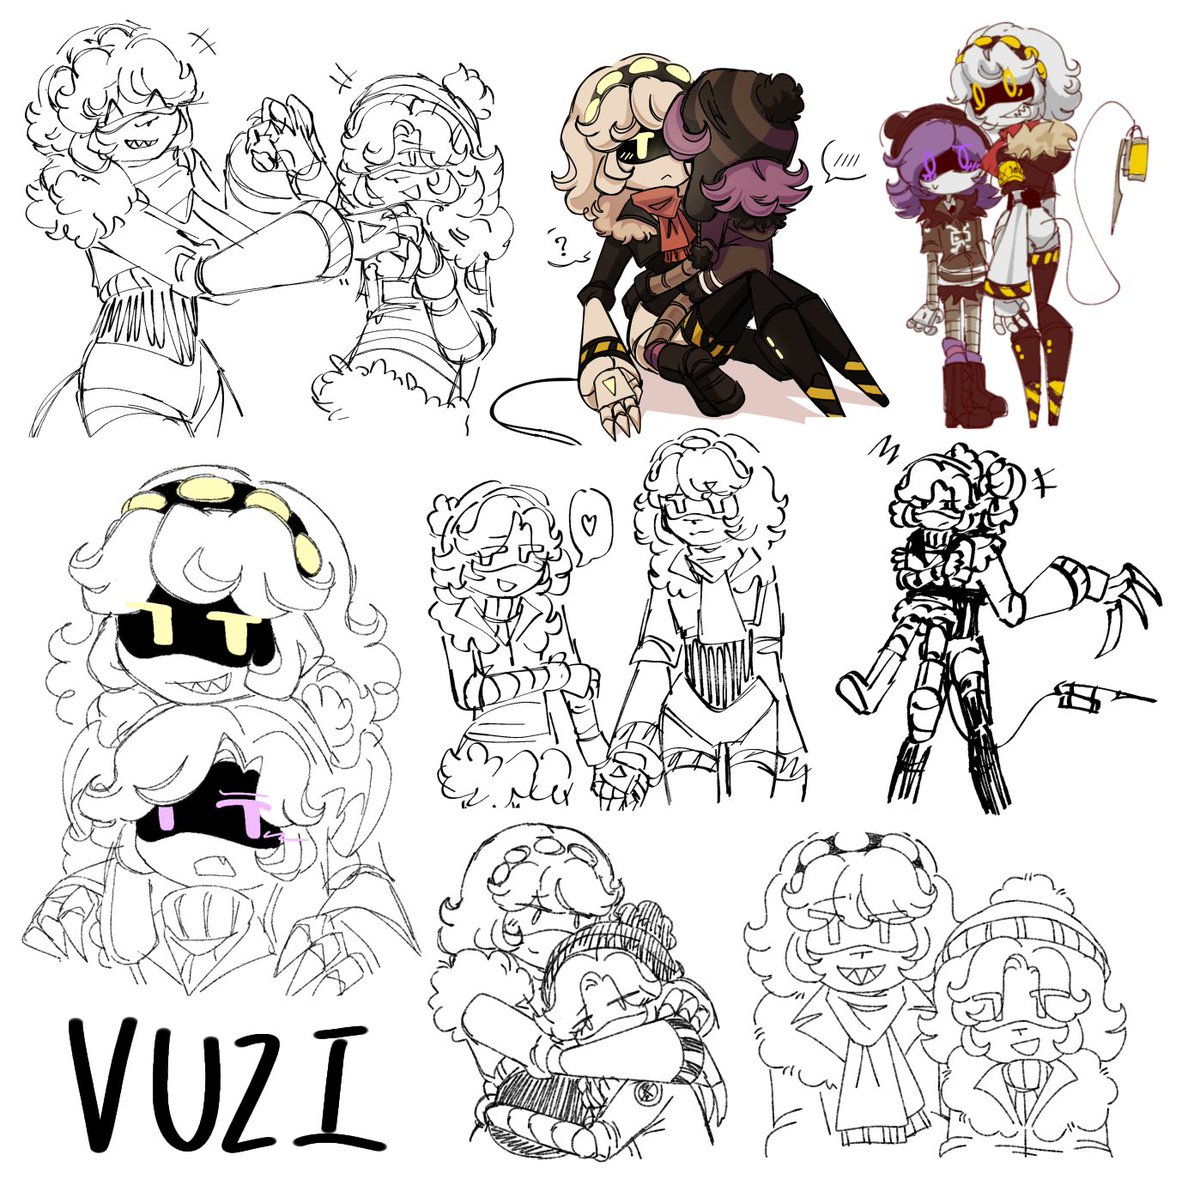 This is all the vuzi art I made I think probably.